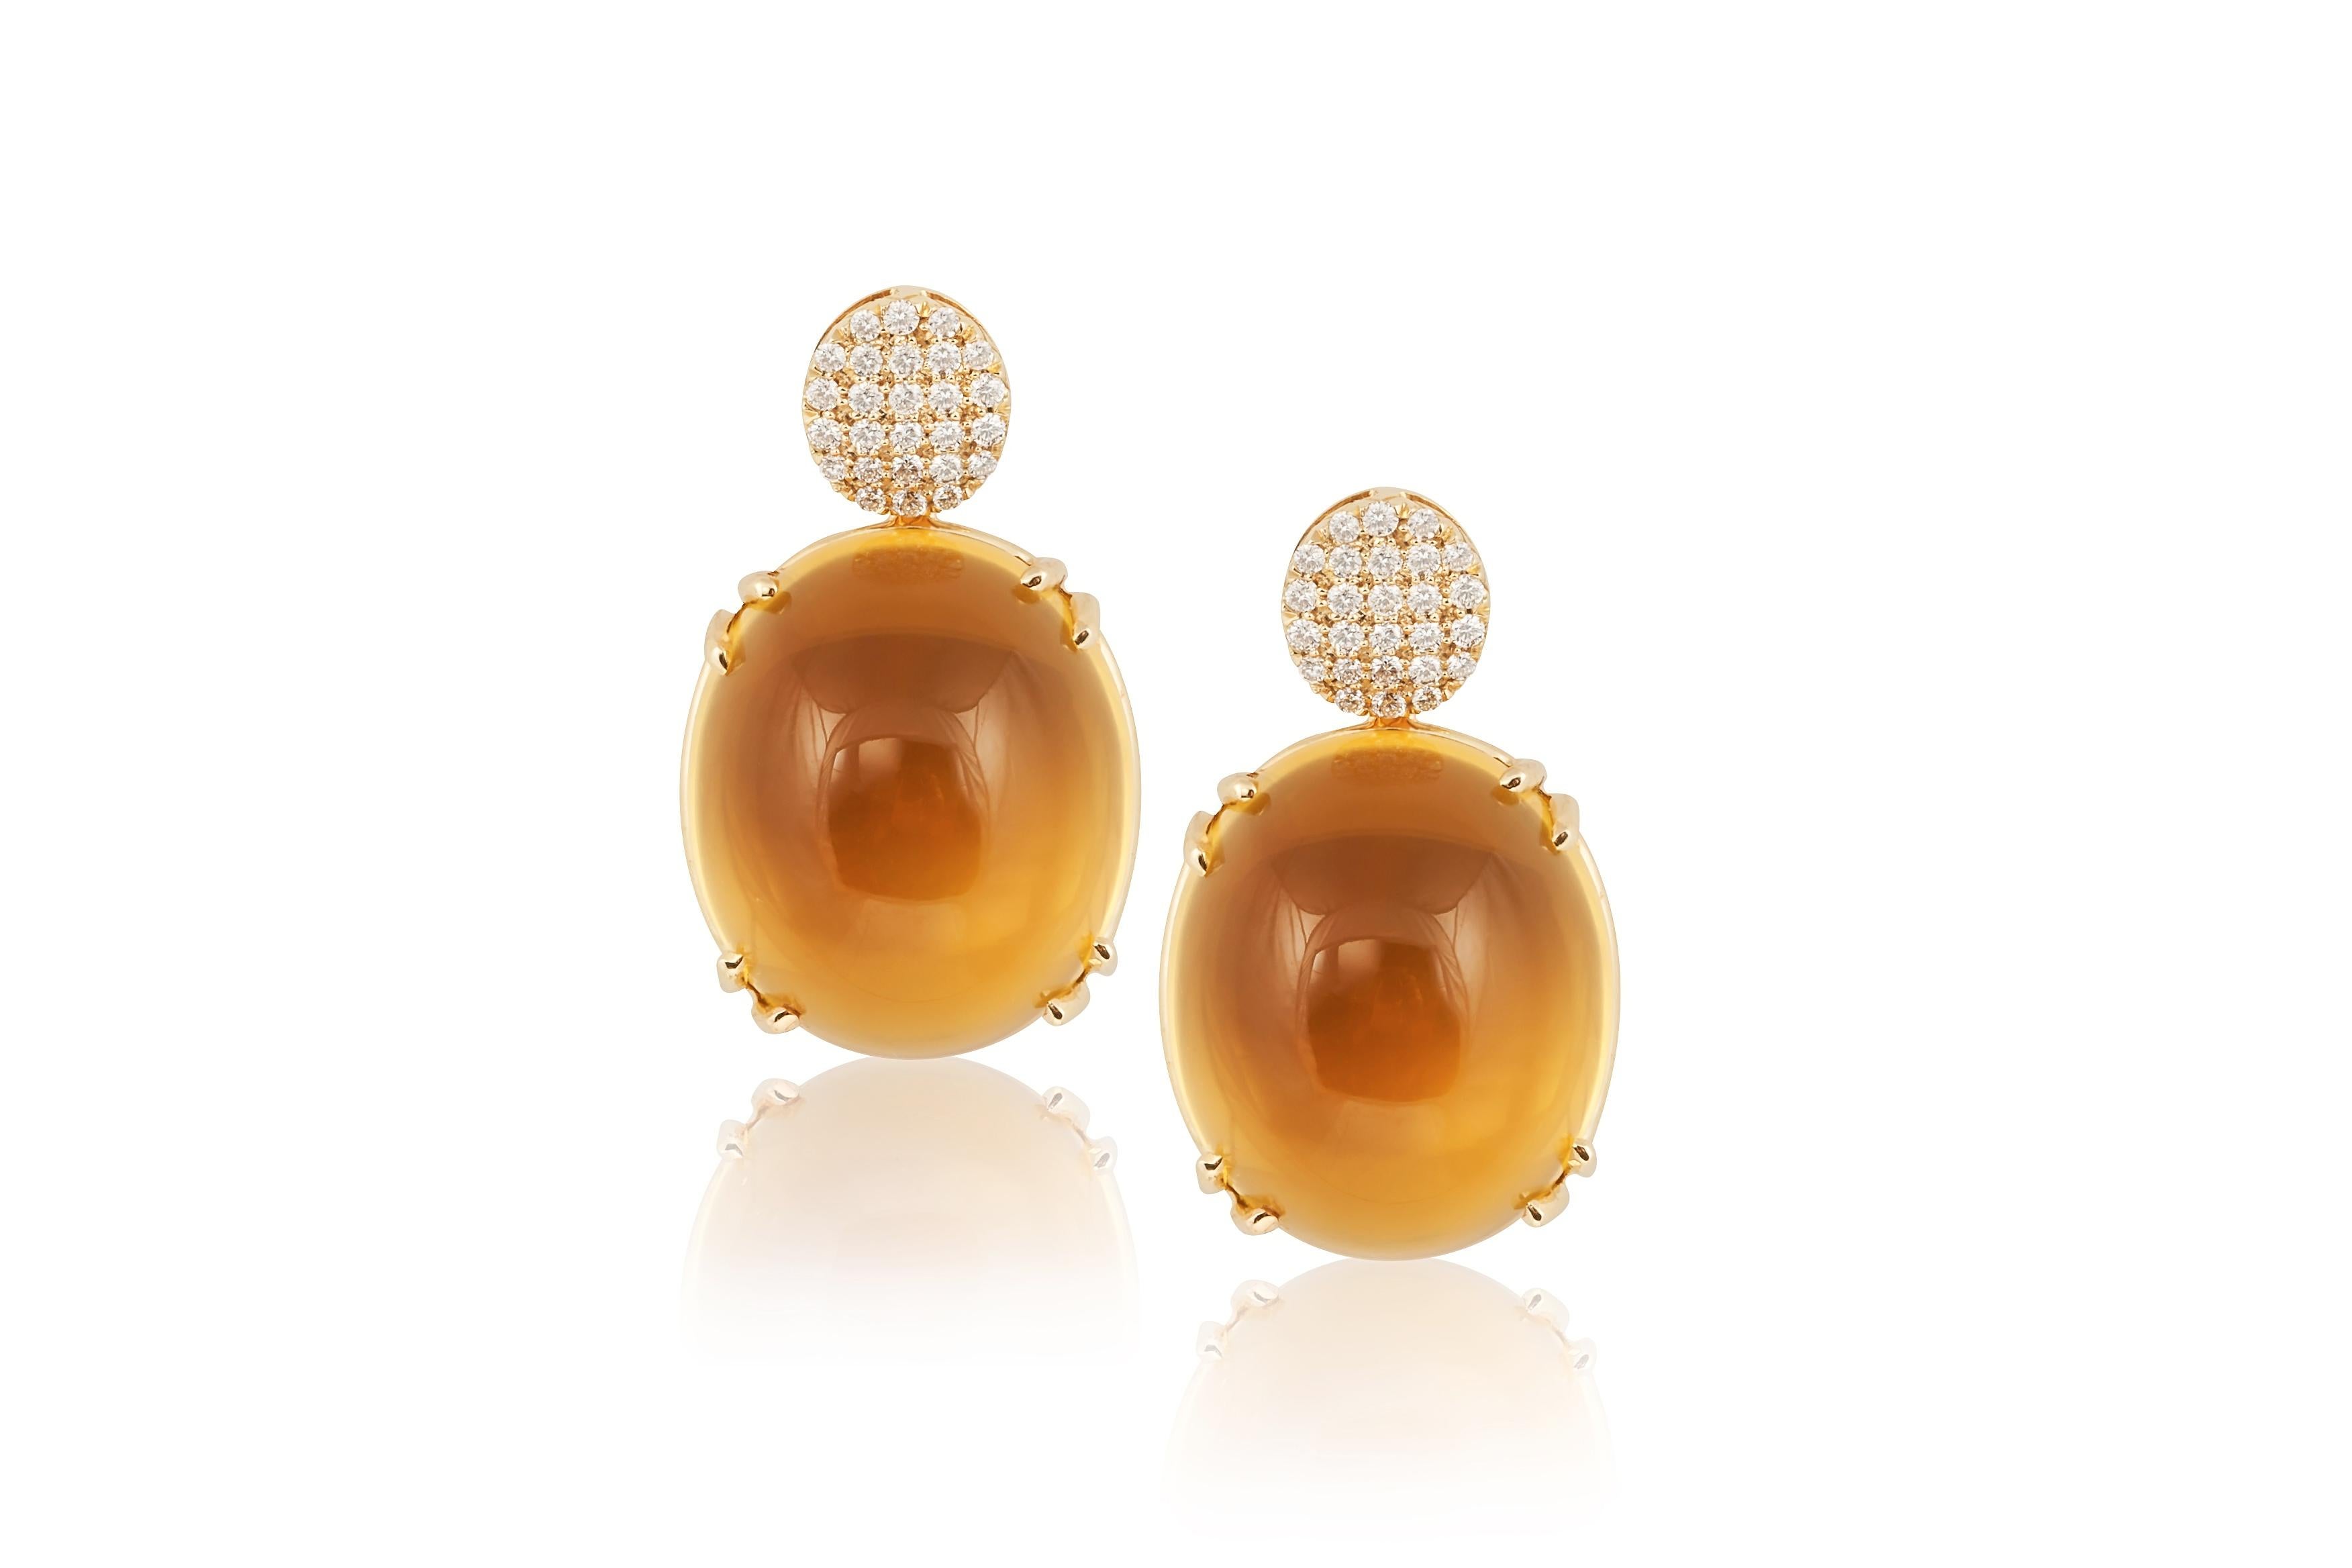 Citrine Oval Cab with Diamonds Motif Earrings from the exquisite 'Rock 'N Roll' Collection. Crafted in stunning 18K Yellow Gold, these earrings are a harmonious blend of elegance and edginess. The focal point of each earring is a lustrous Citrine